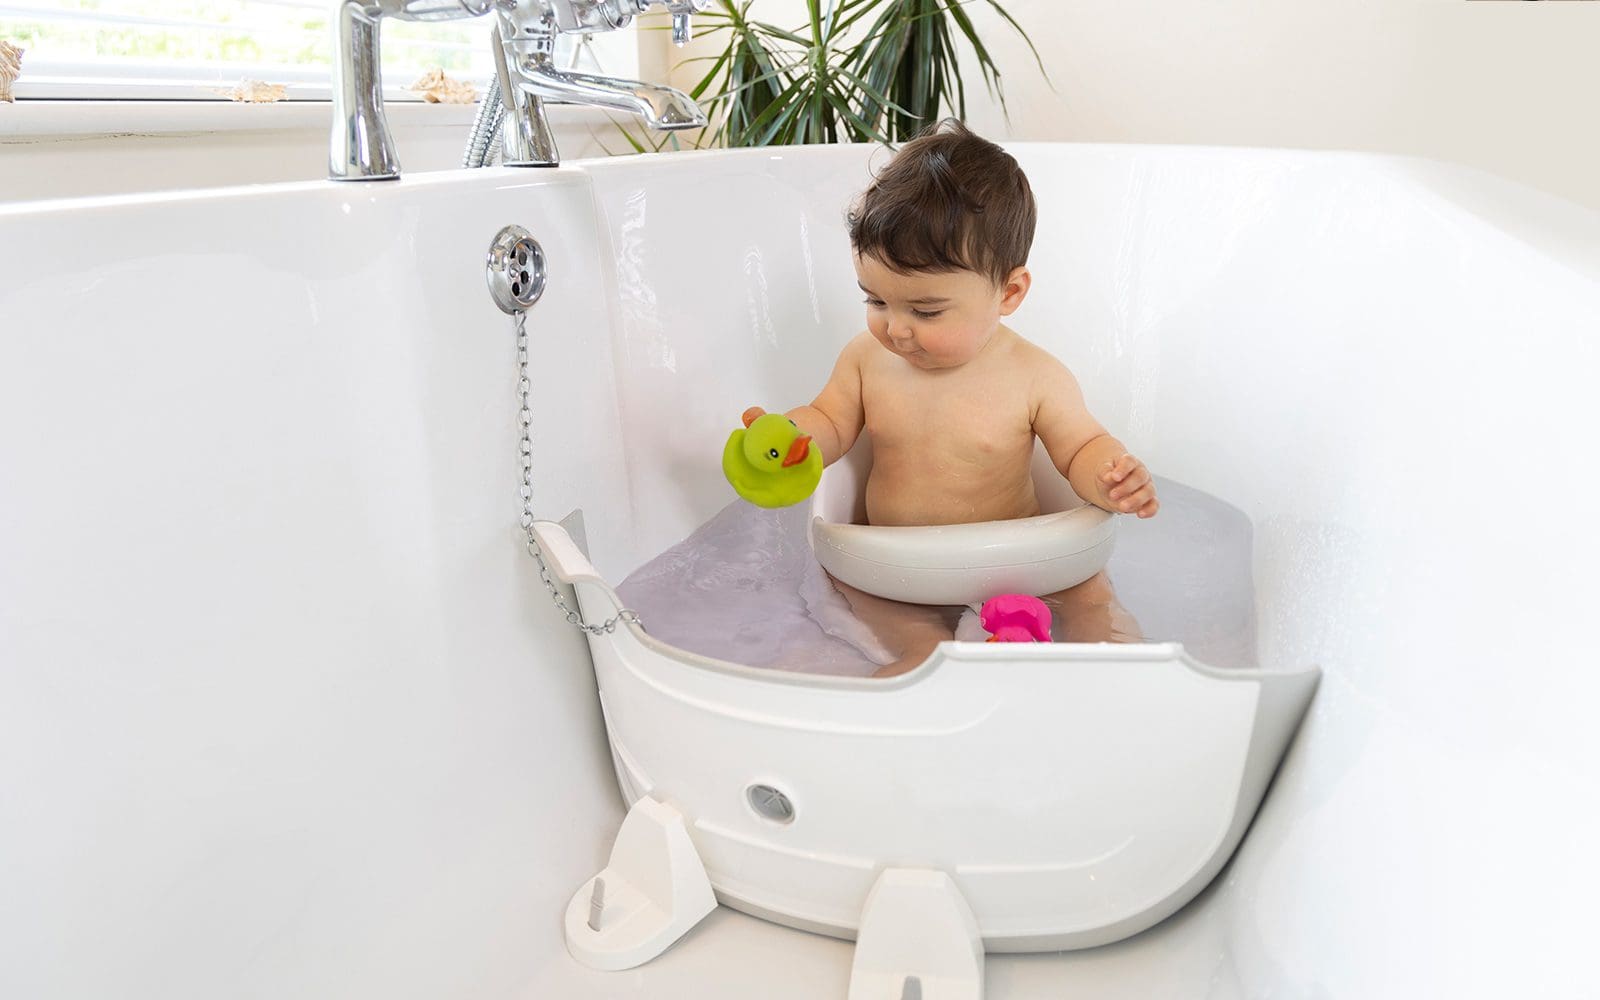 BabyDam, the original bathwater barrier fitted perfectly in a bath with taps in the middle of the bath